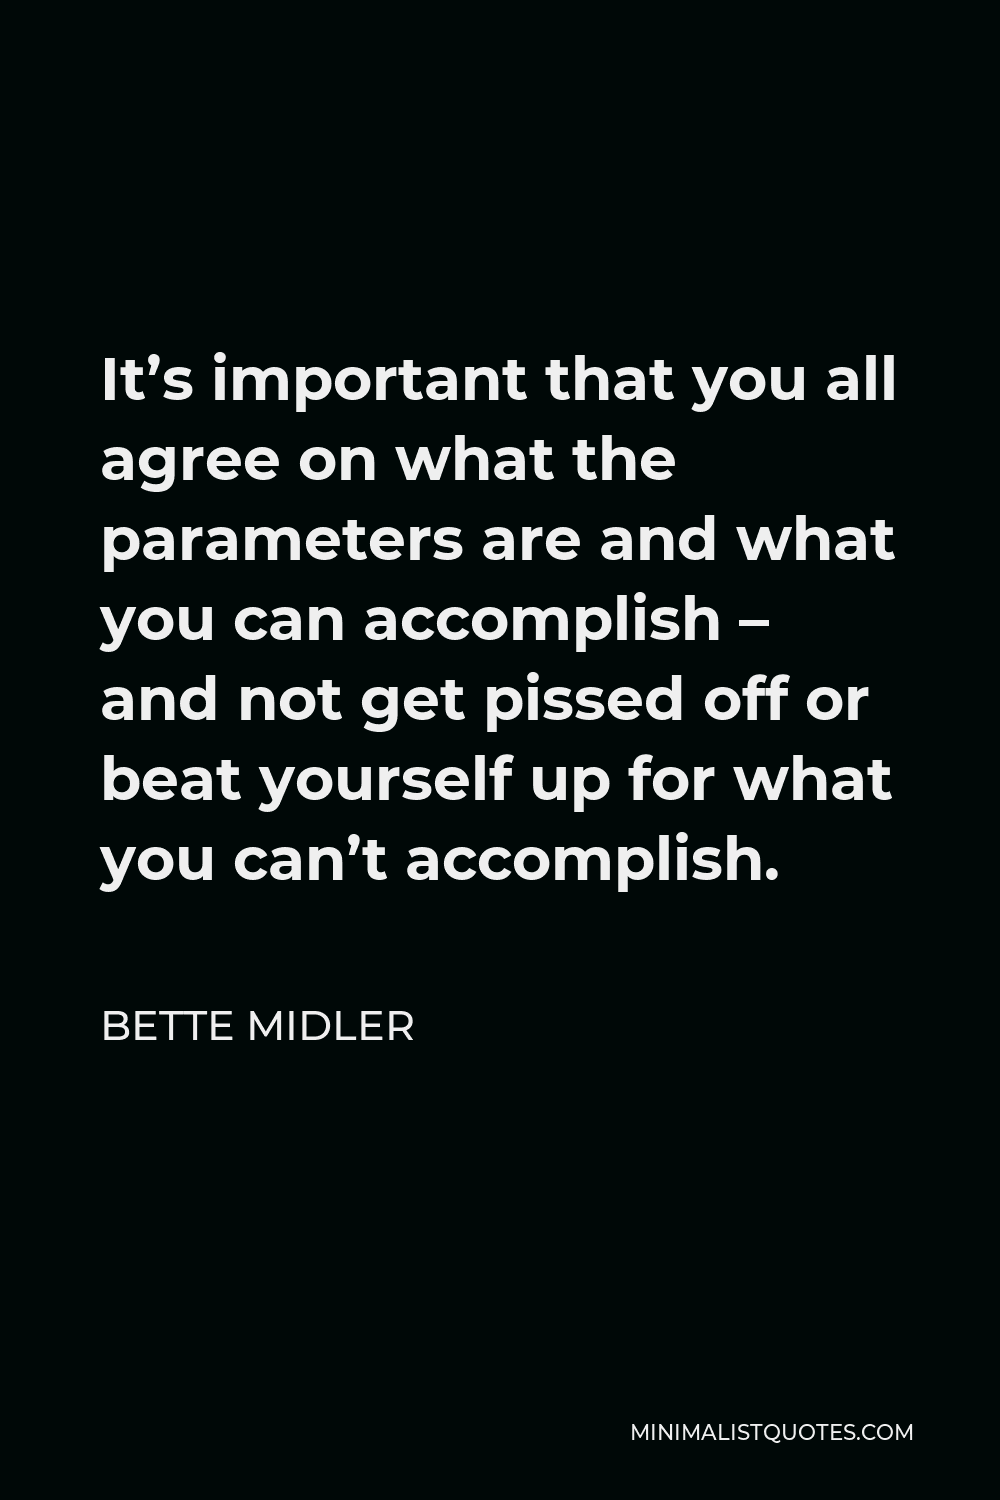 Bette Midler Quote - It’s important that you all agree on what the parameters are and what you can accomplish – and not get pissed off or beat yourself up for what you can’t accomplish.